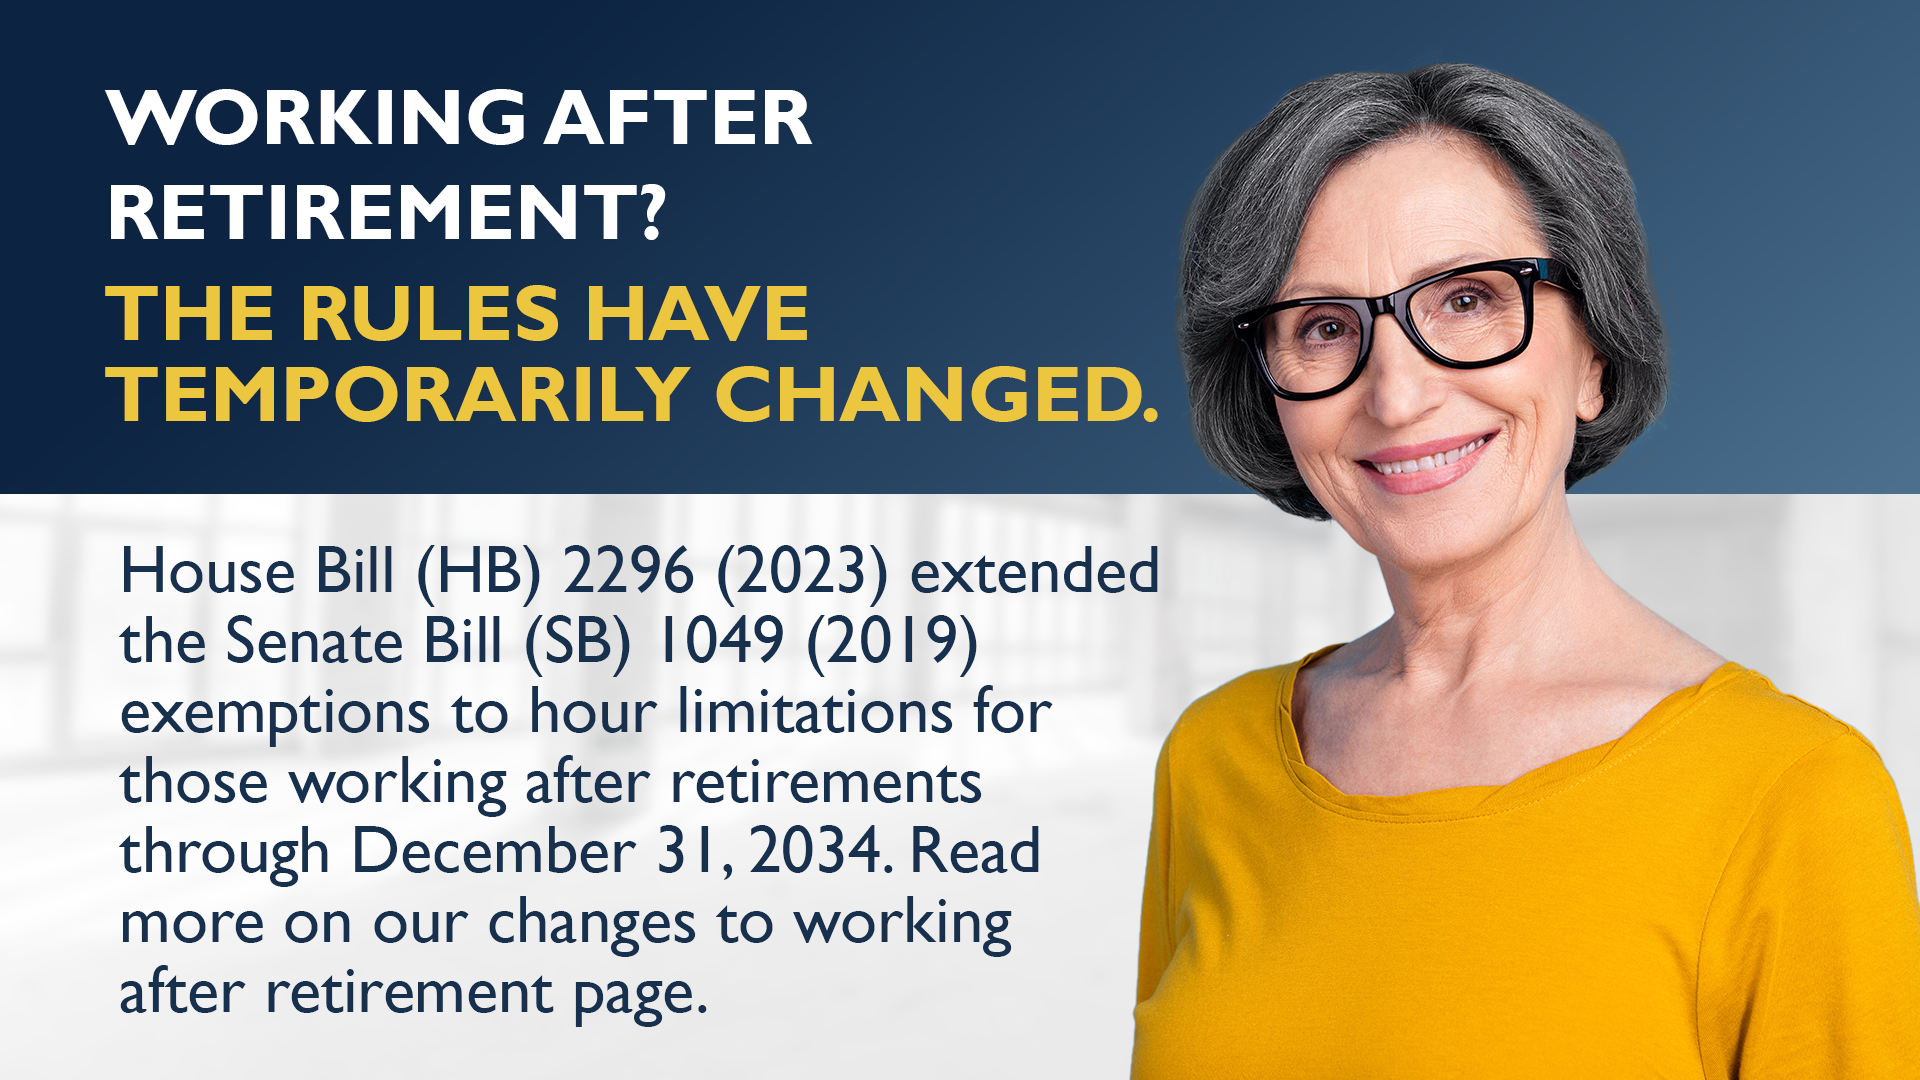 Working after retirement? The rules have temporarily changed. House Bill (HB) 2296 (2023) extended the Senate Bill (SB) 1049 (2019) exemptions to hour limitations for those working after retirements through December 31, 2034. Read more on our working after retirement webpage.